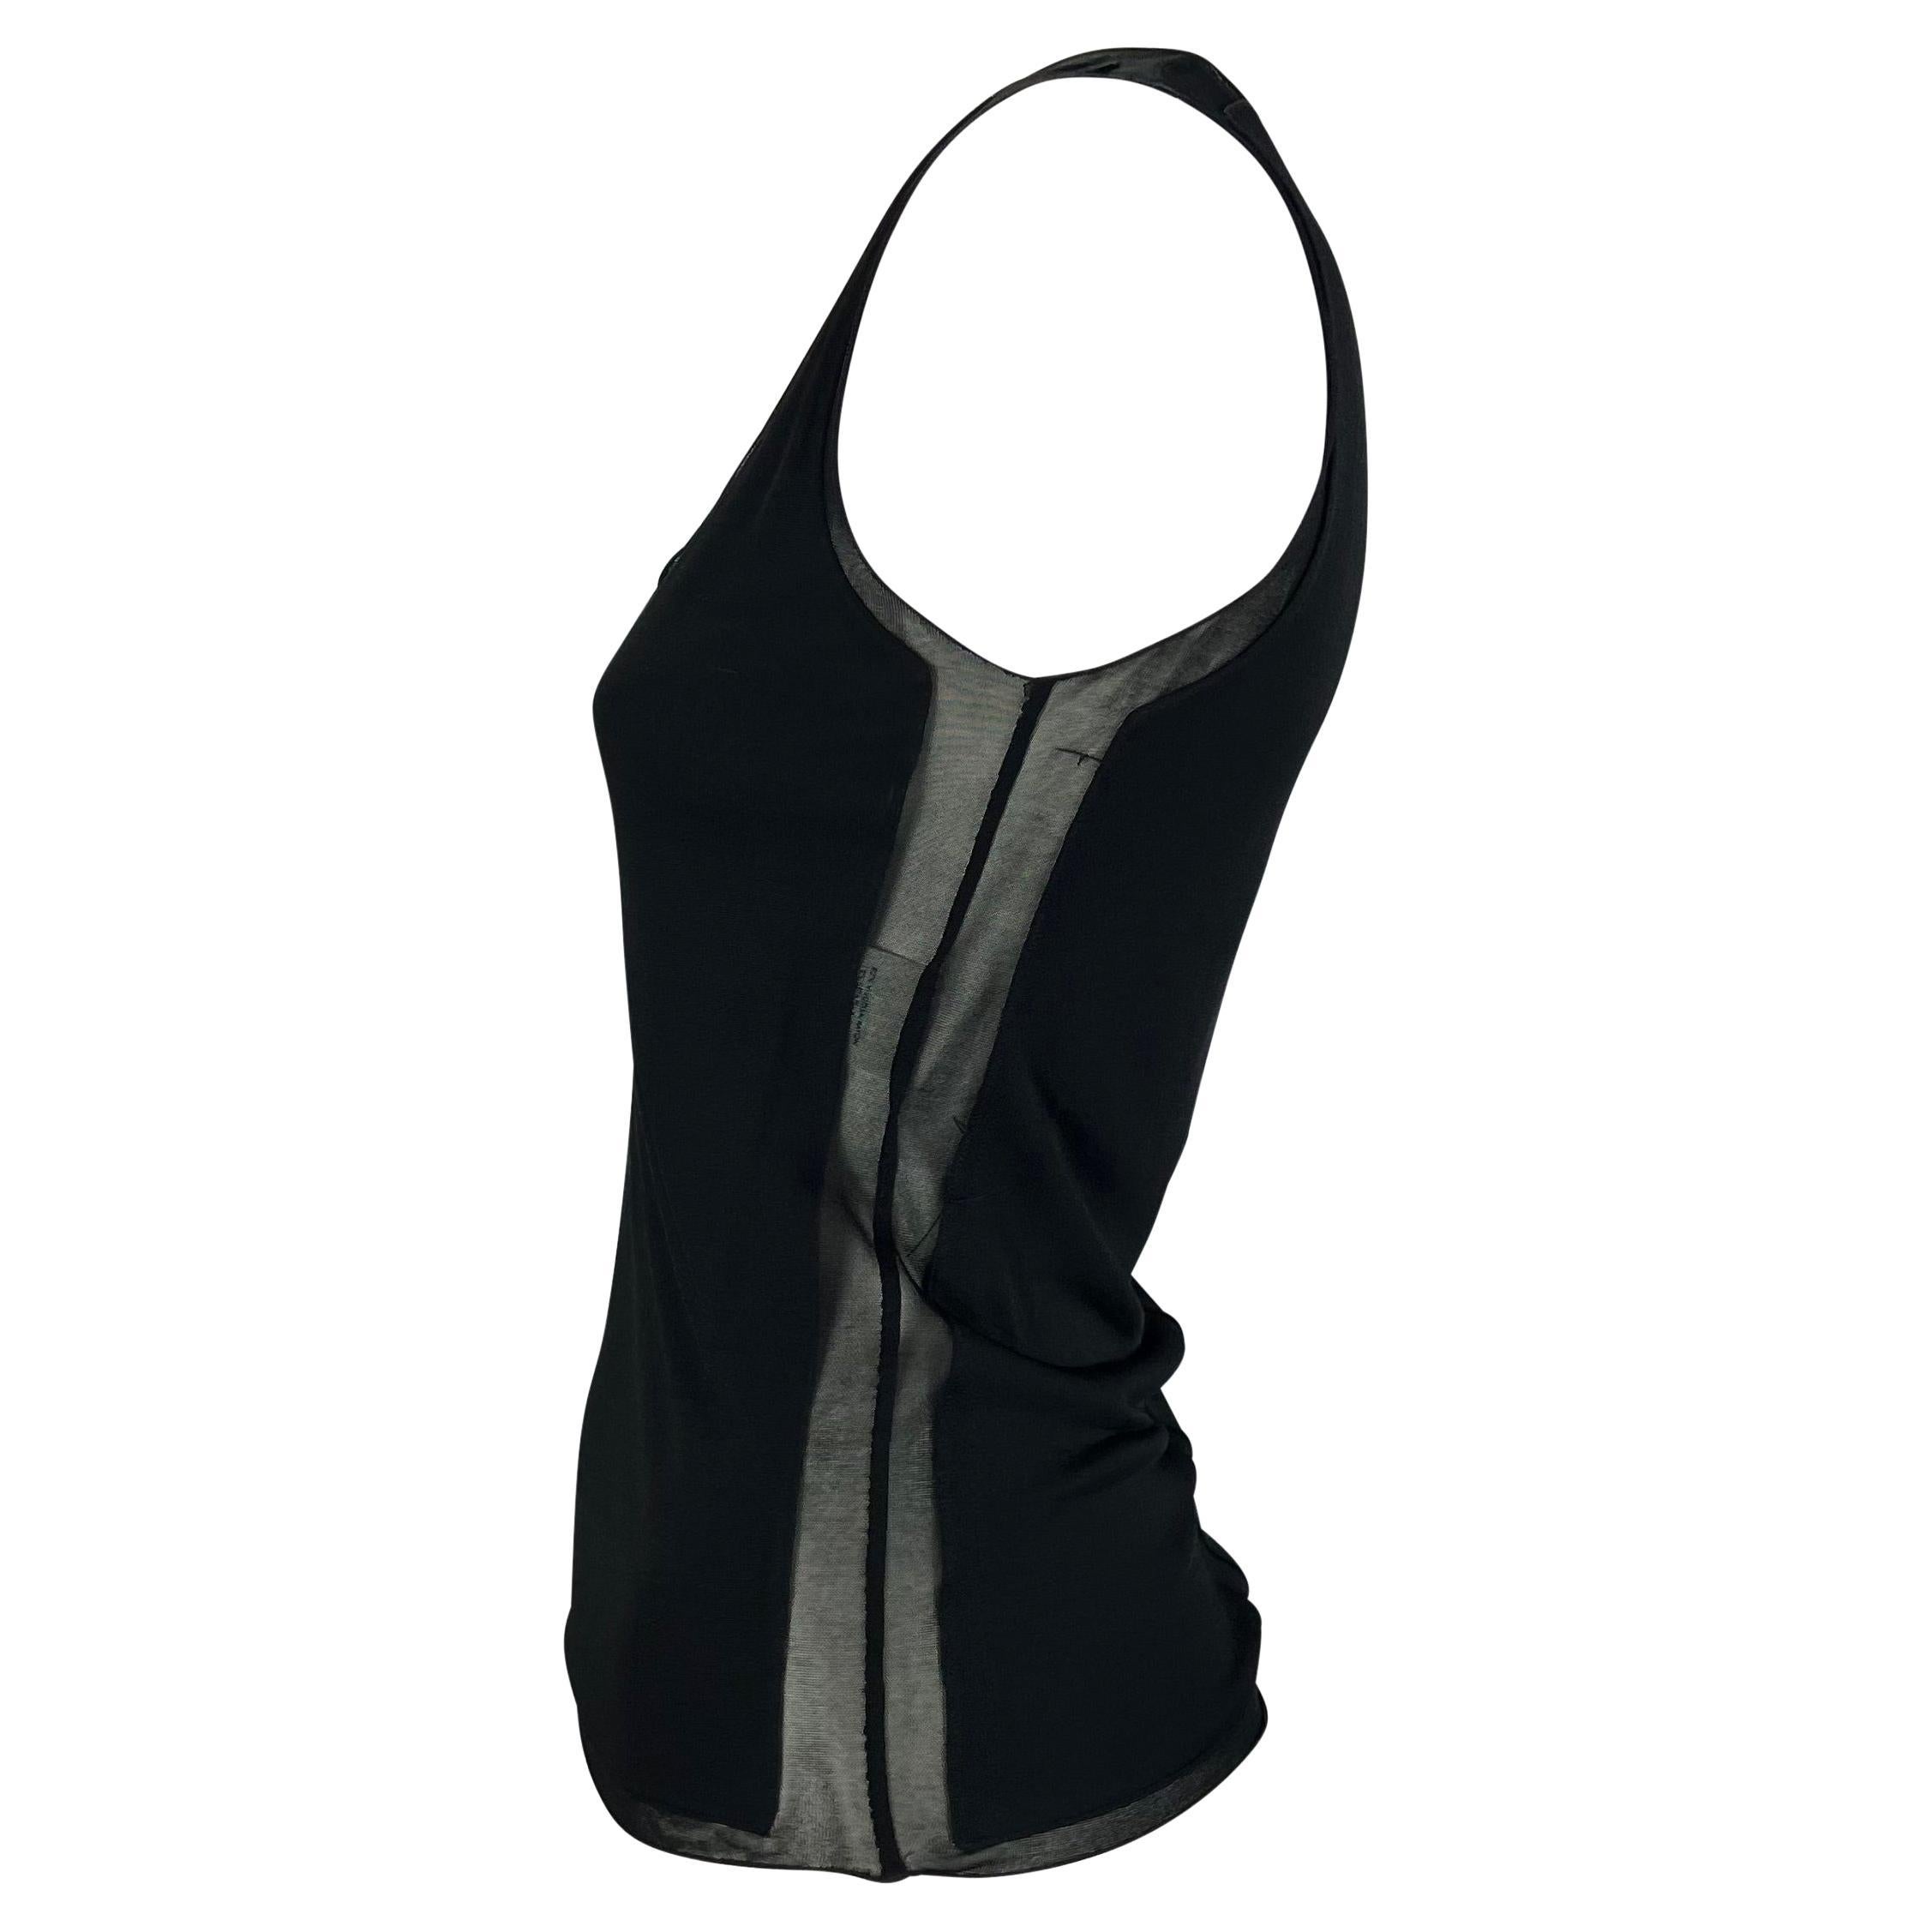 TheRealList presents: a black sheer panel Yves Saint Laurent tank top, designed by Tom Ford. From the early 2000s, this top is elevated with small sheer details around the scoop neckline as well as down the back and on the sides.

Follow us on